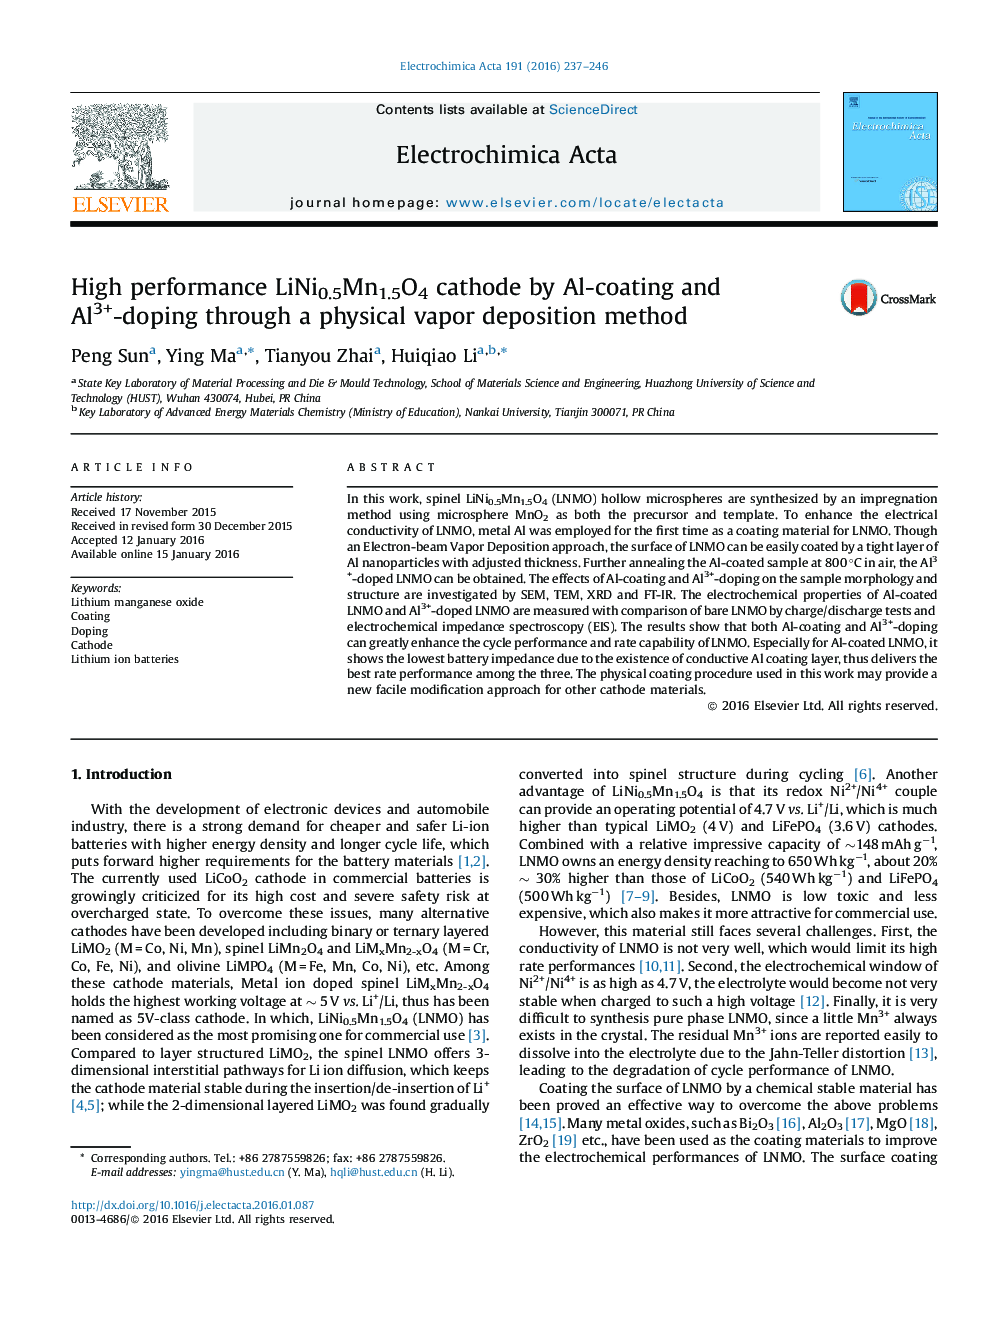 High performance LiNi0.5Mn1.5O4 cathode by Al-coating and Al3+-doping through a physical vapor deposition method